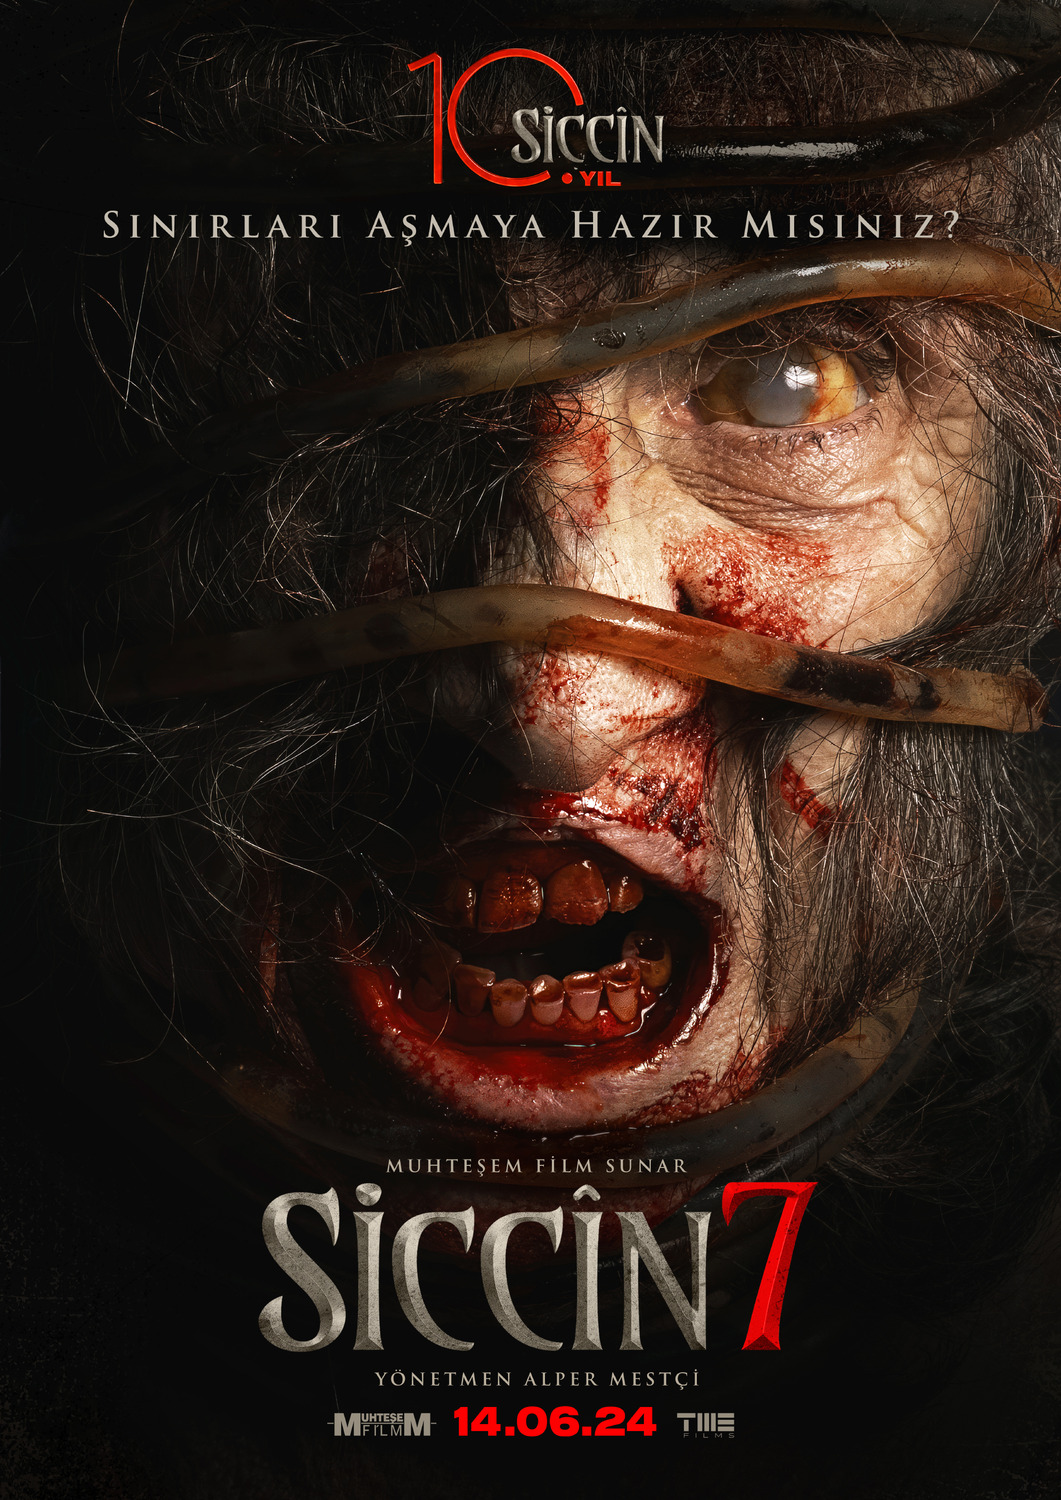 Extra Large Movie Poster Image for Siccin 7 